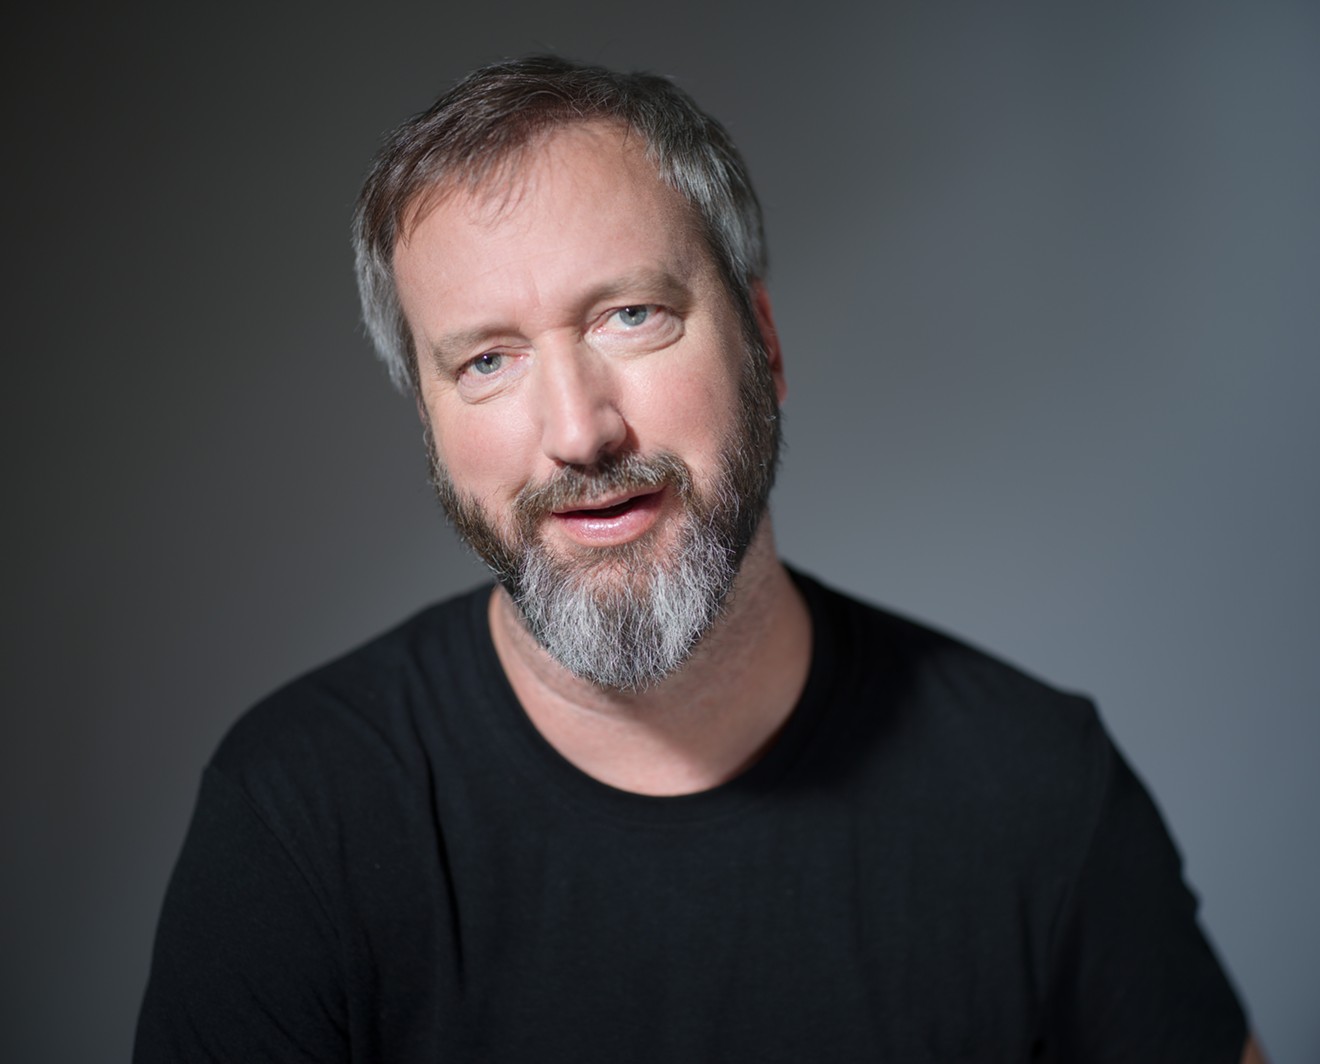 Comedian Tom Green, known as "The Chad" in Charlie's Angels and for his show on MTV, is coming to the Addison Improv.